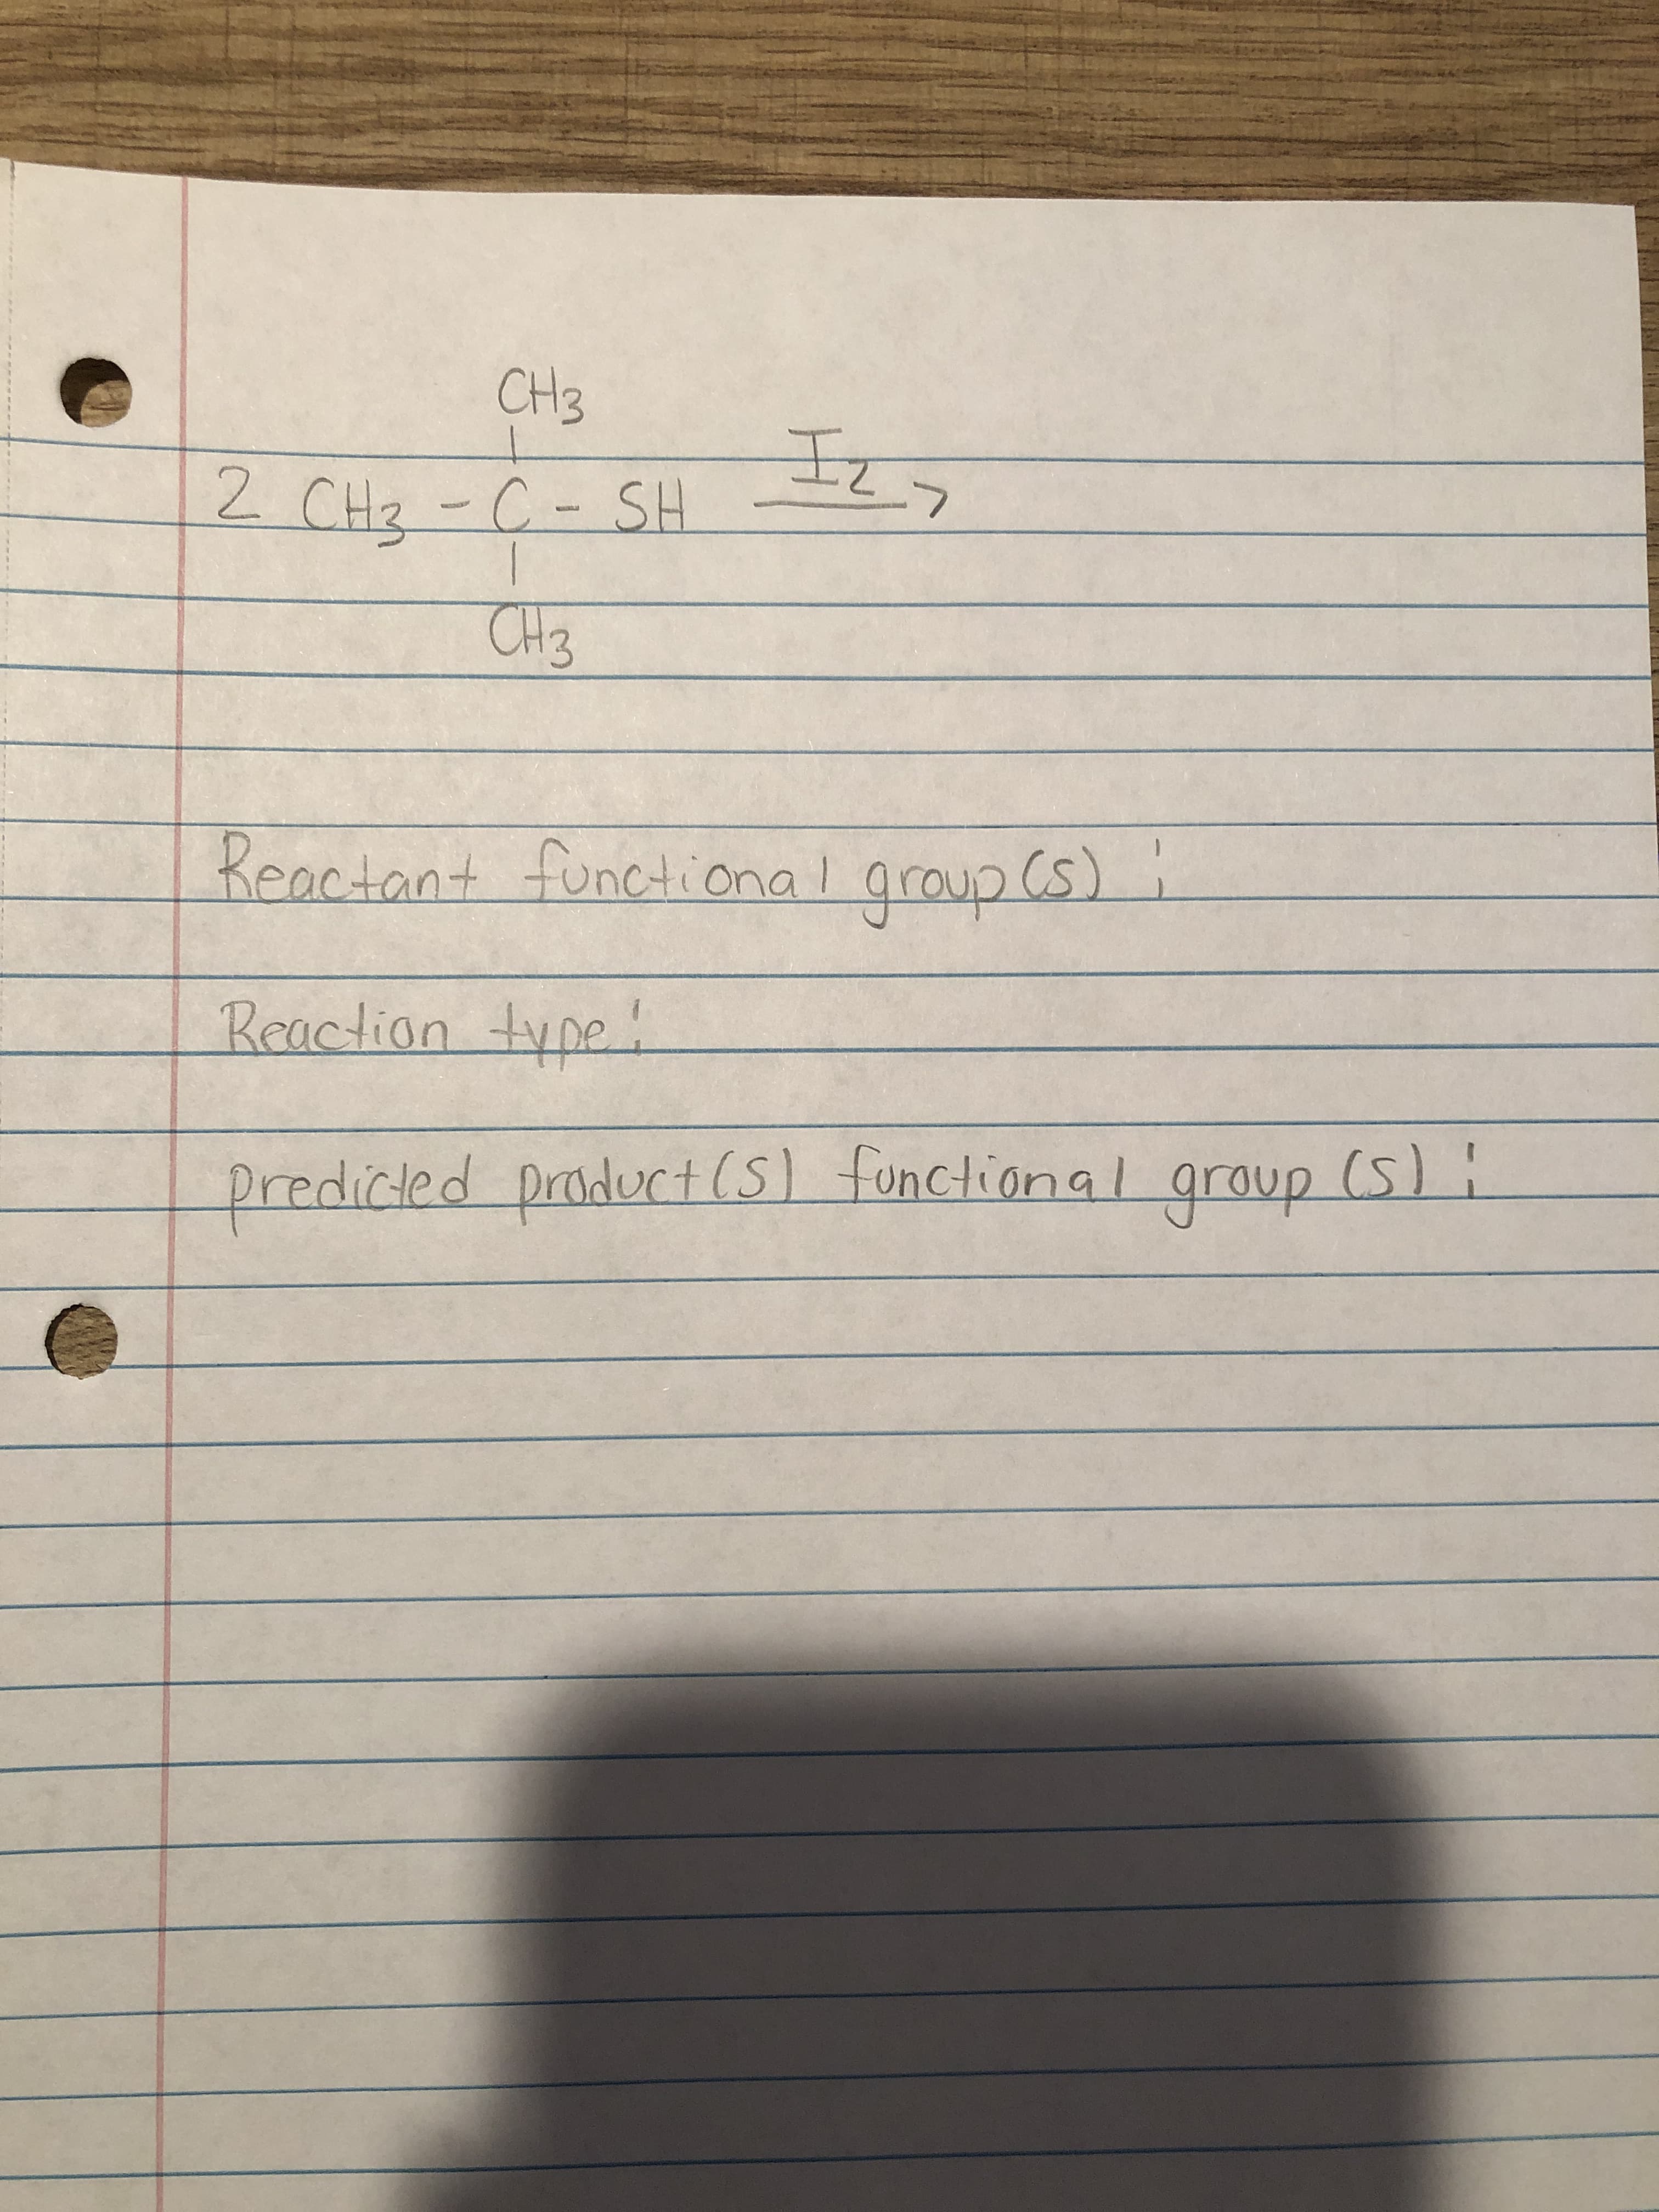 CH3
Reactant functional graup Cs)
:
Reaction type!
predited product (S) functional (S)!
graup
